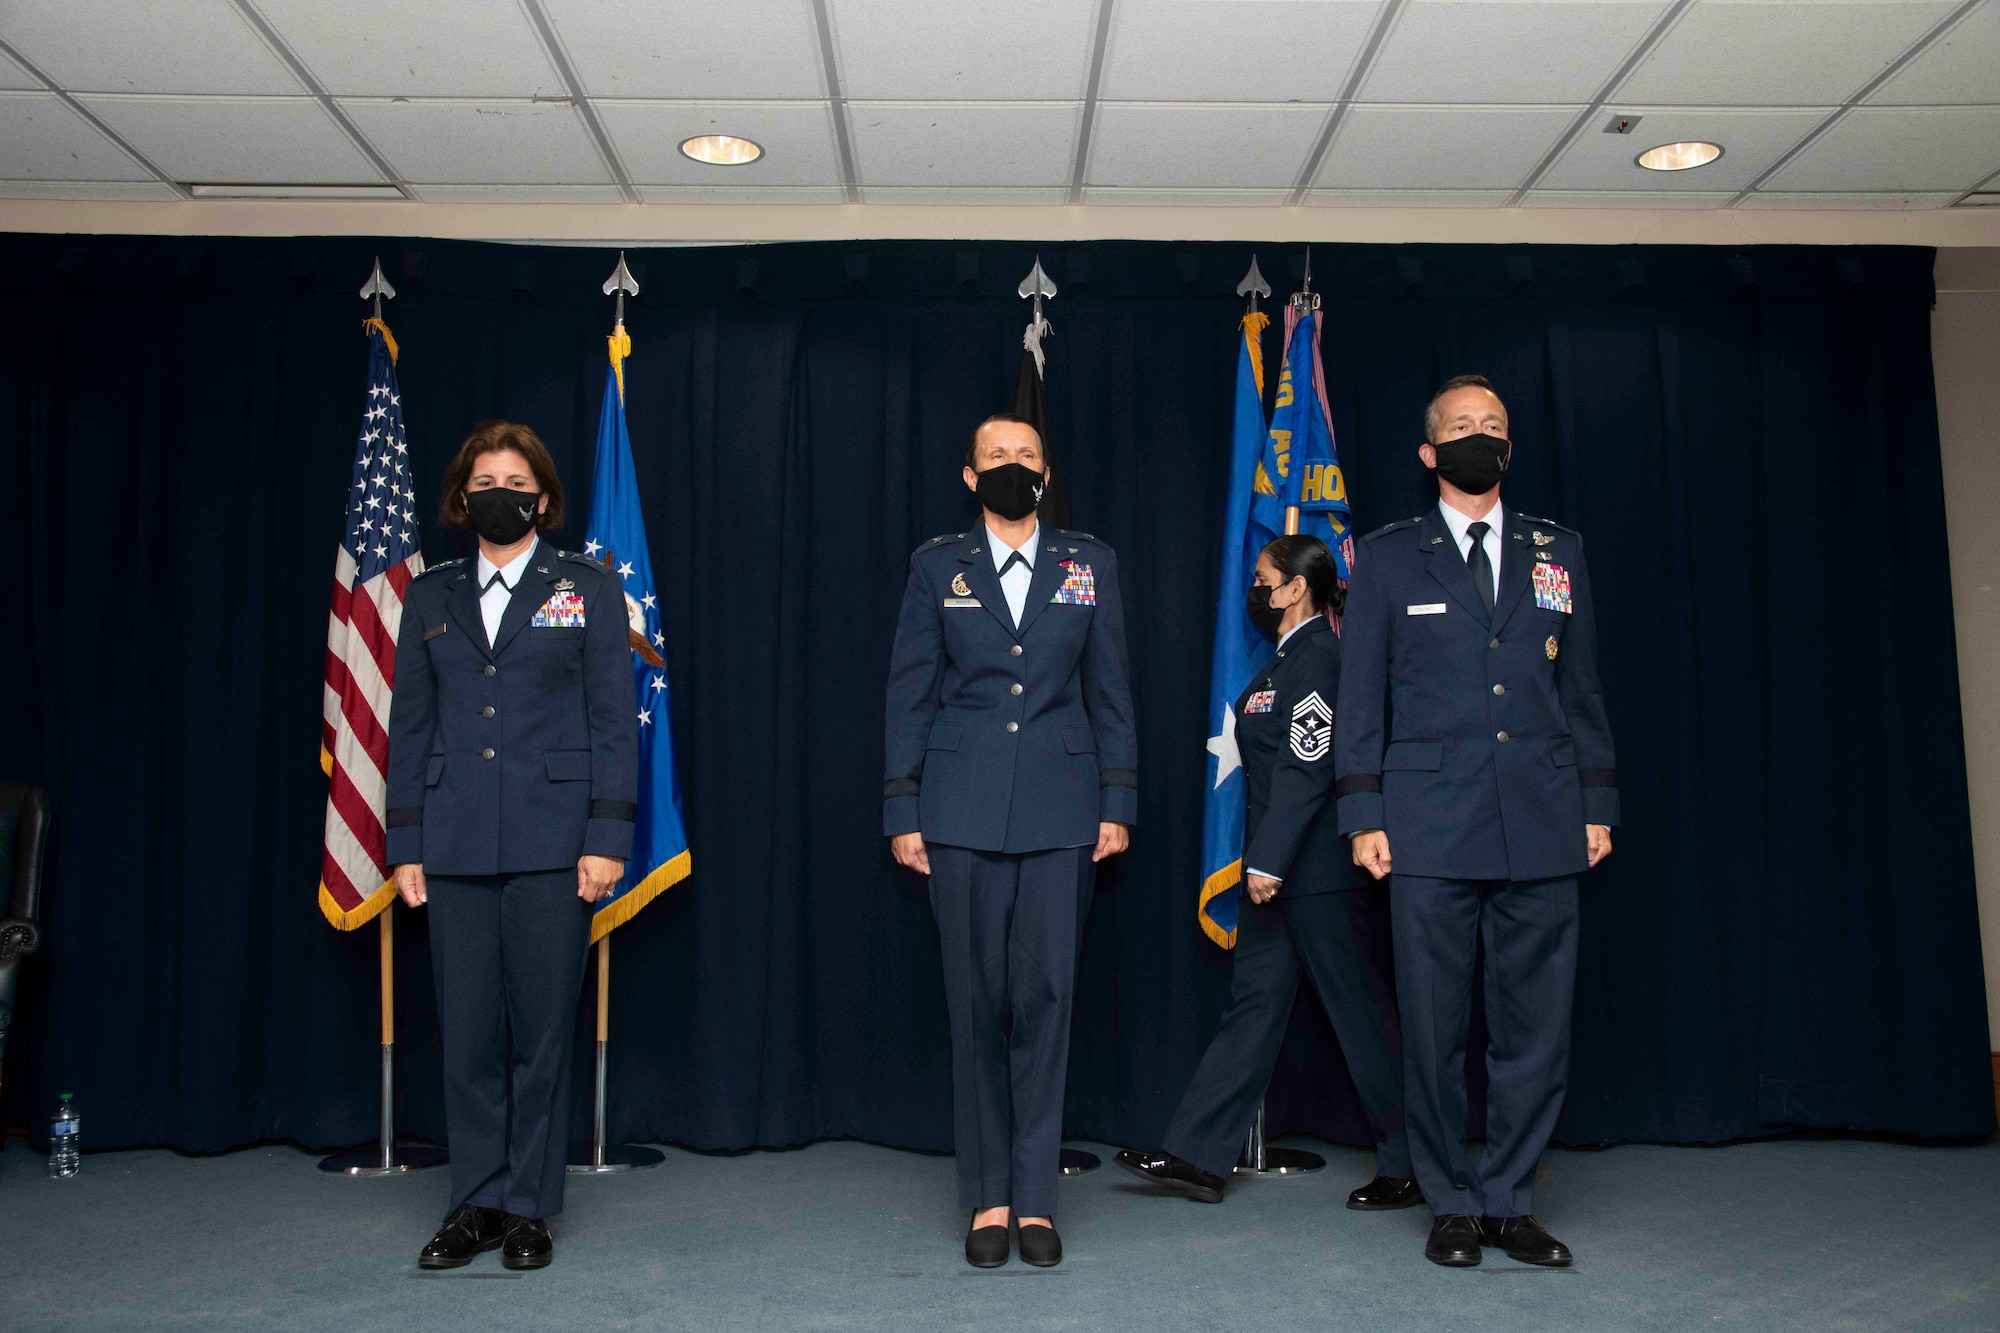 Brig. Gen. Houston Cantwell (right) took command of the Jeanne M. Holm Center for Officer Accessions and Citizen Development from Brig. Gen. Leslie Maher (center) during a change of command ceremony, July 28, 2022, Maxwell Air Force Base, Alabama. Lt. Gen. Andrea Tullos (left), Air University commander and president, presided over the ceremony. Cantwell’s previous assignment was as commander, NATO Alliance Ground Surveillance Force, Sigonella Air Base, Italy. The Holm Center is responsible for Air Force ROTC, Air Force Junior ROTC and Officer Training School. (U.S. Air Force photo by Darius Hutton)